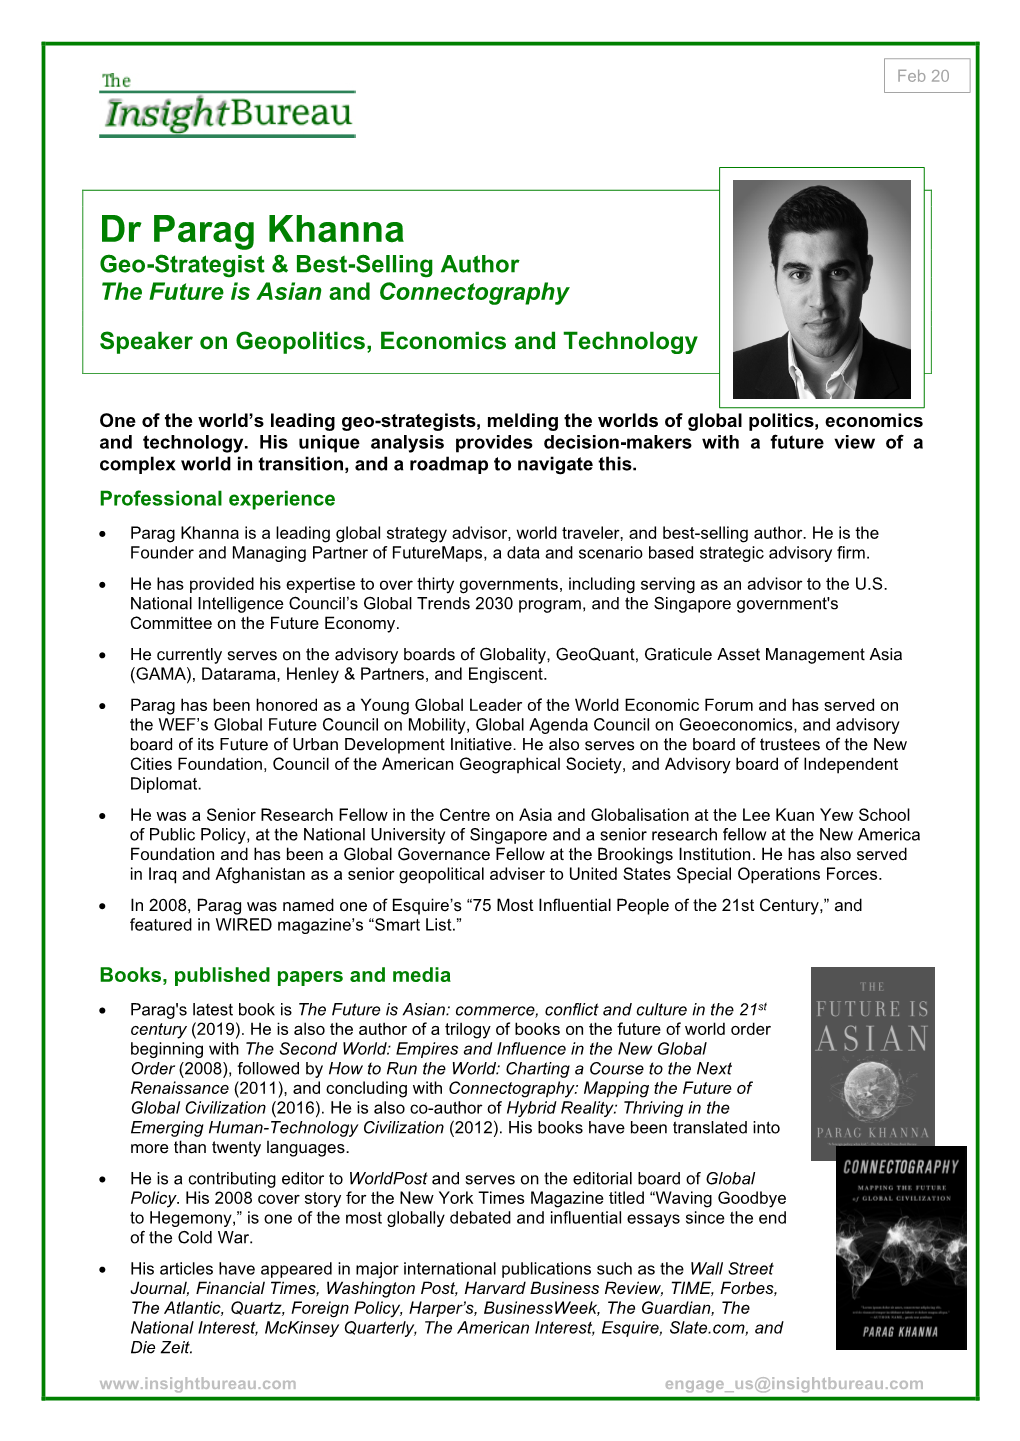 Dr Parag Khanna Geo-Strategist & Best-Selling Author the Future Is Asian and Connectography